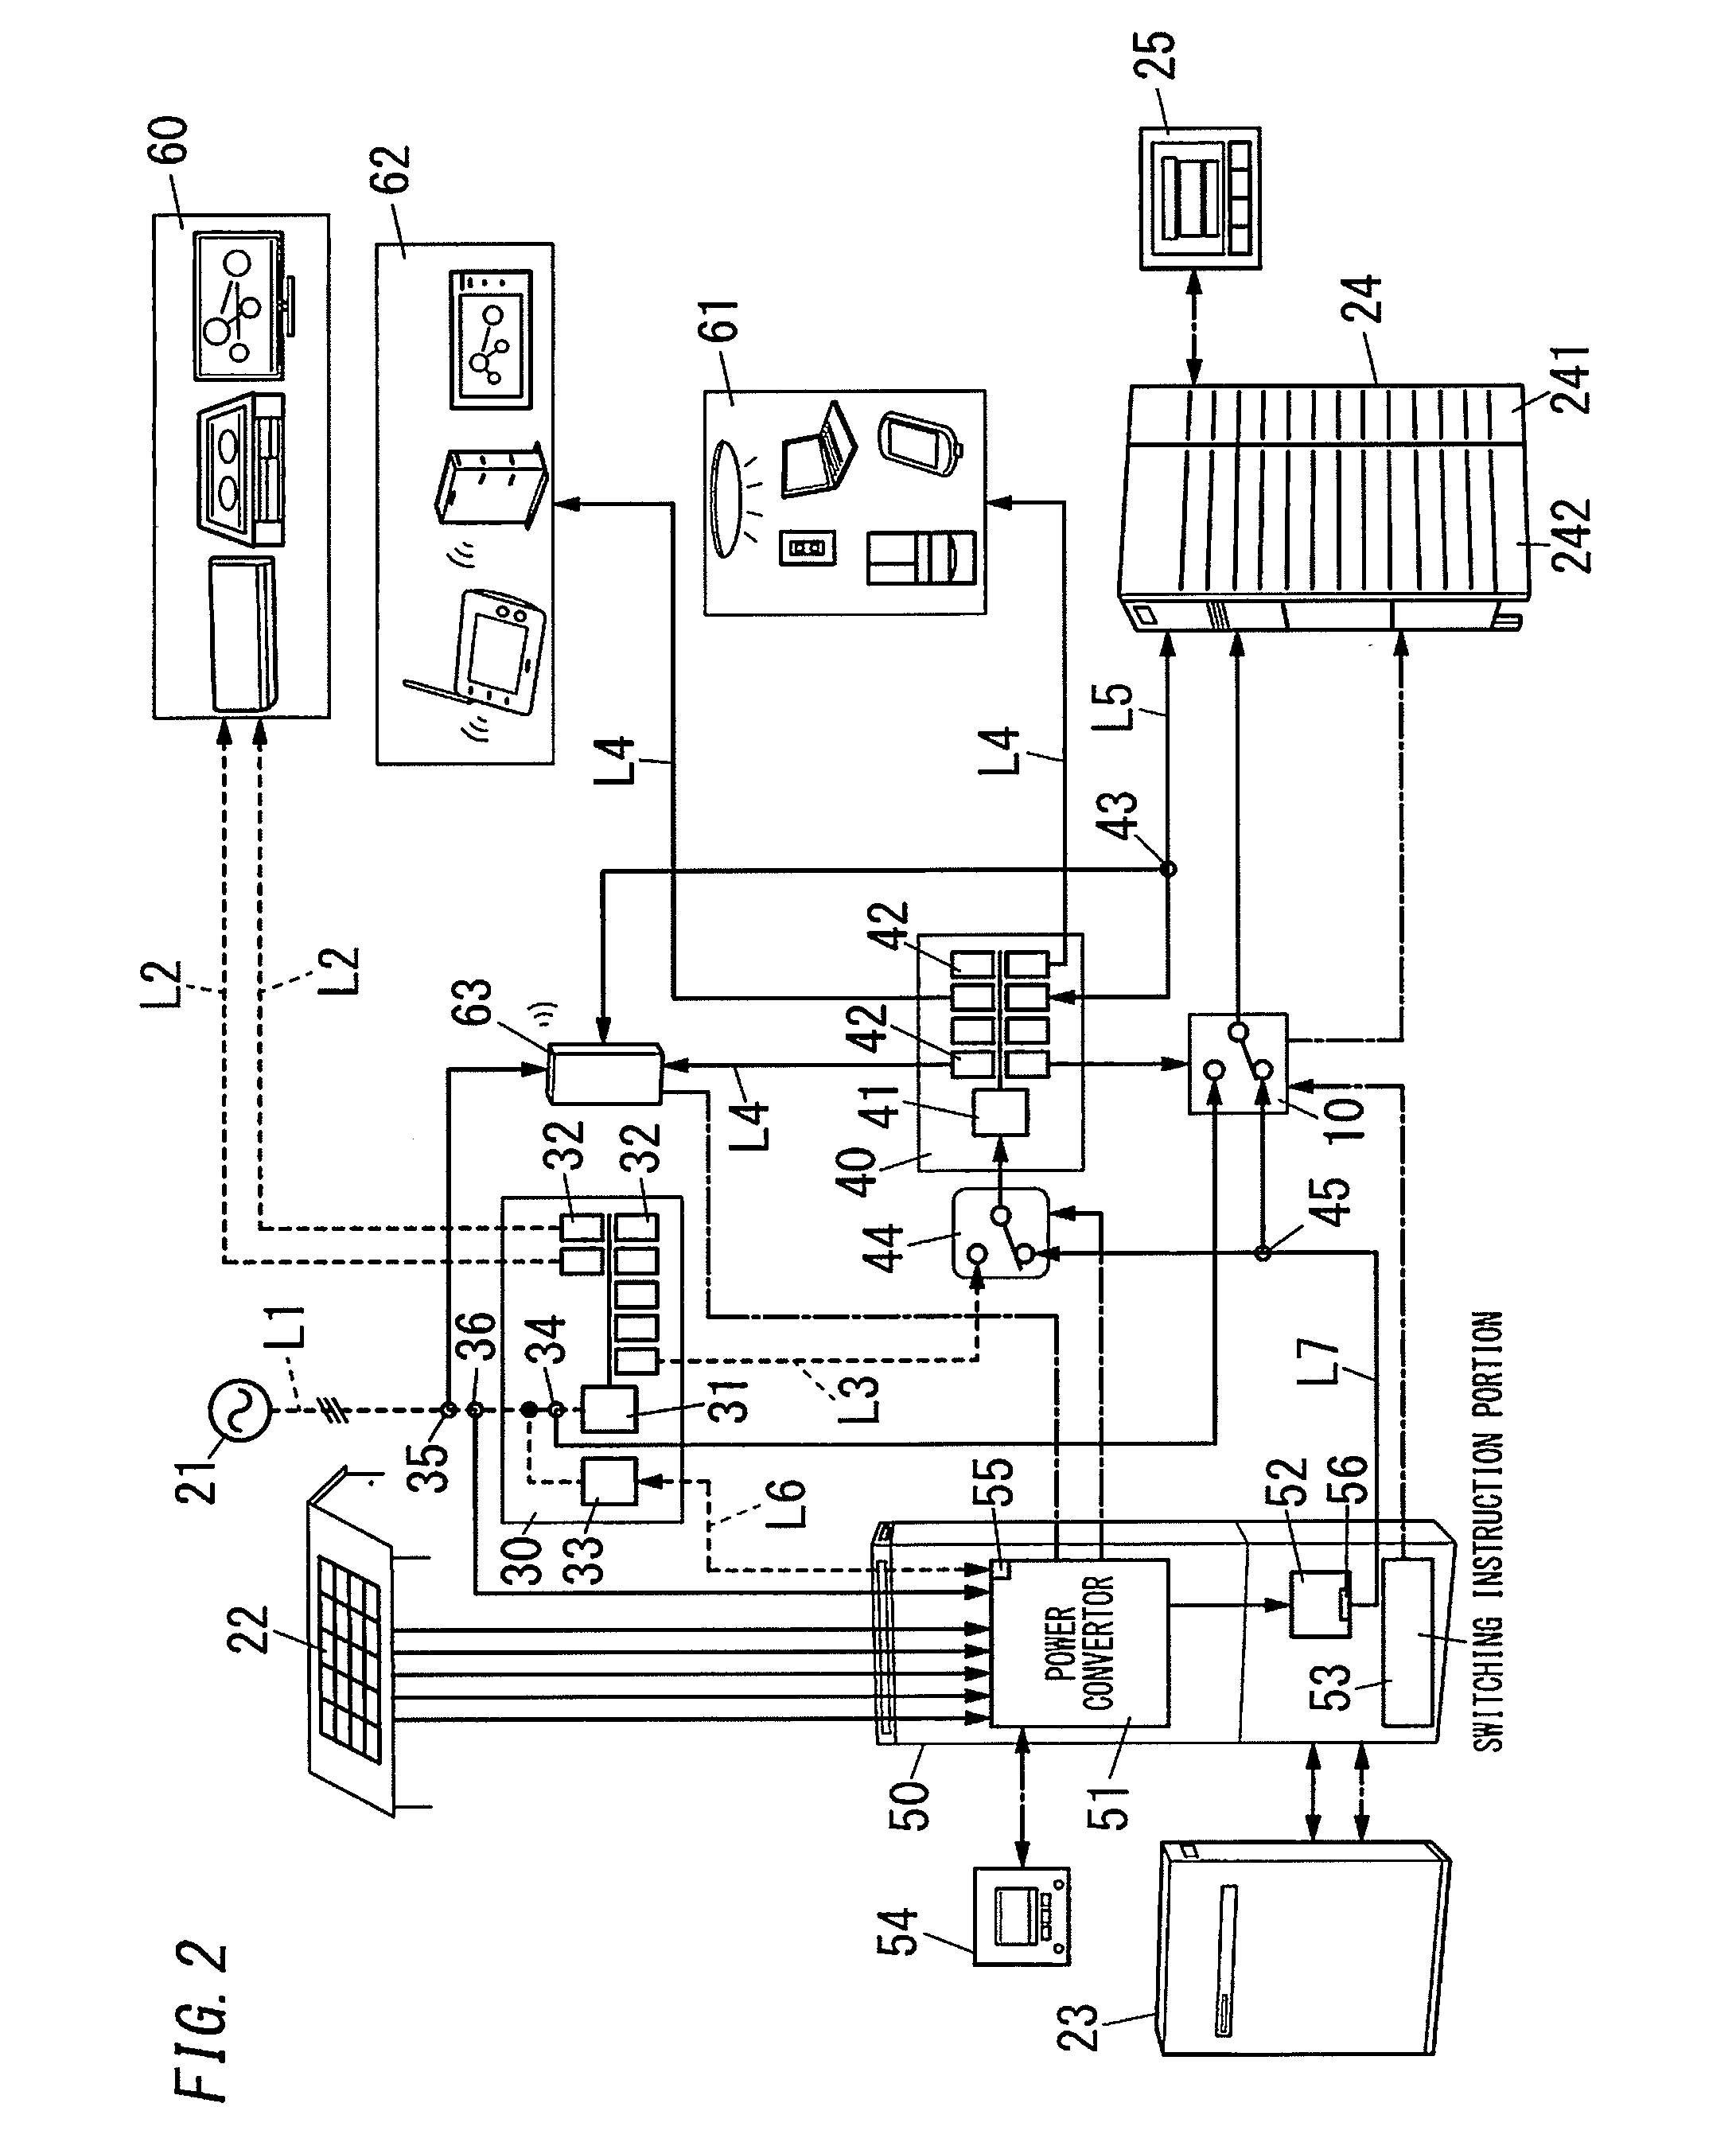 Power supply system, power conversion apparatus, and measurement point switching apparatus